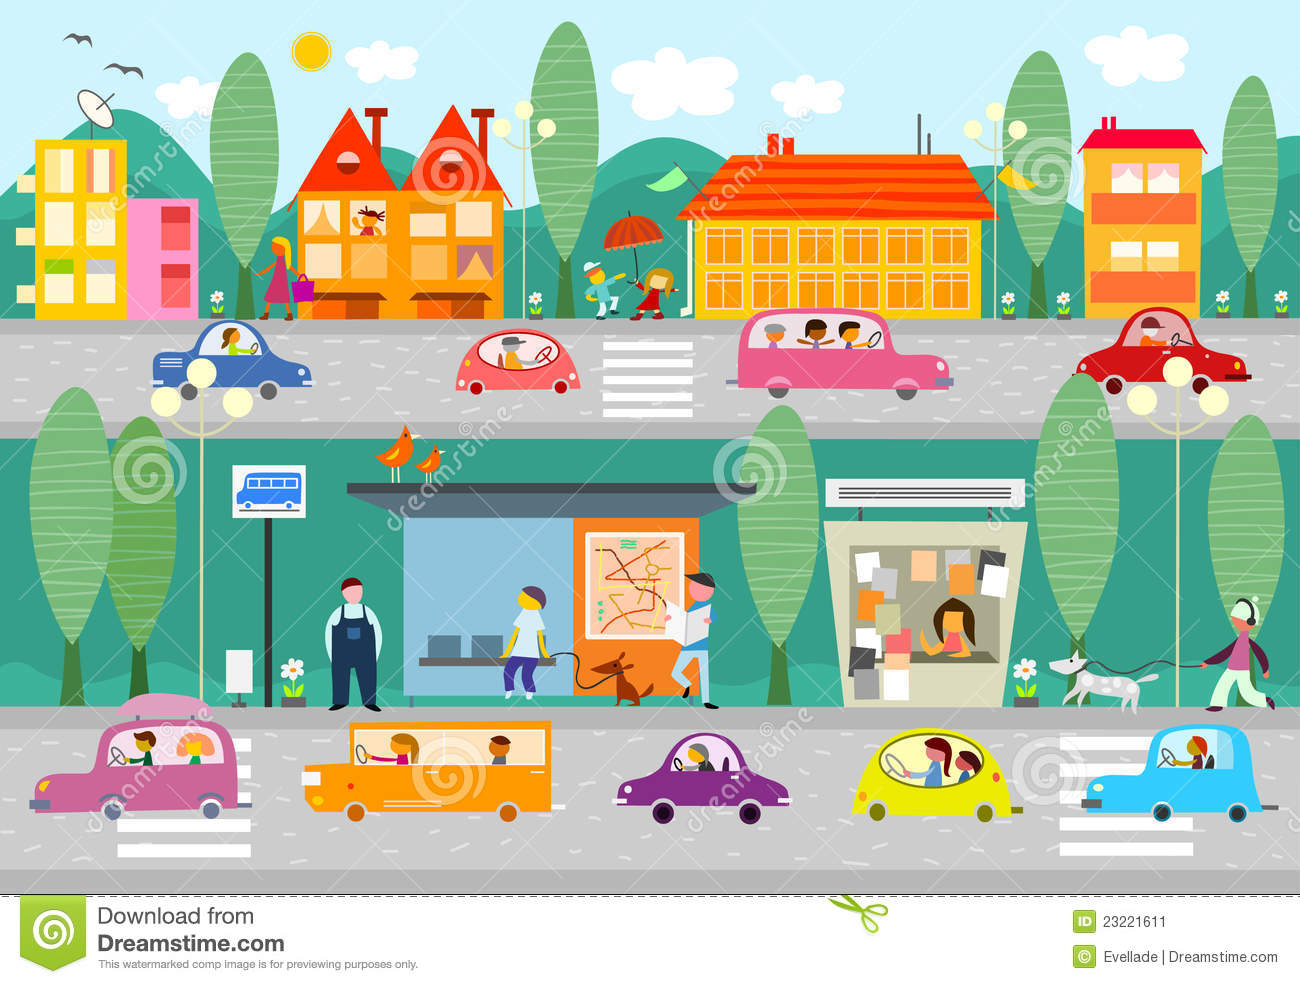 Illustration Of A Day Scene In A City With Bus Stop Cars People And